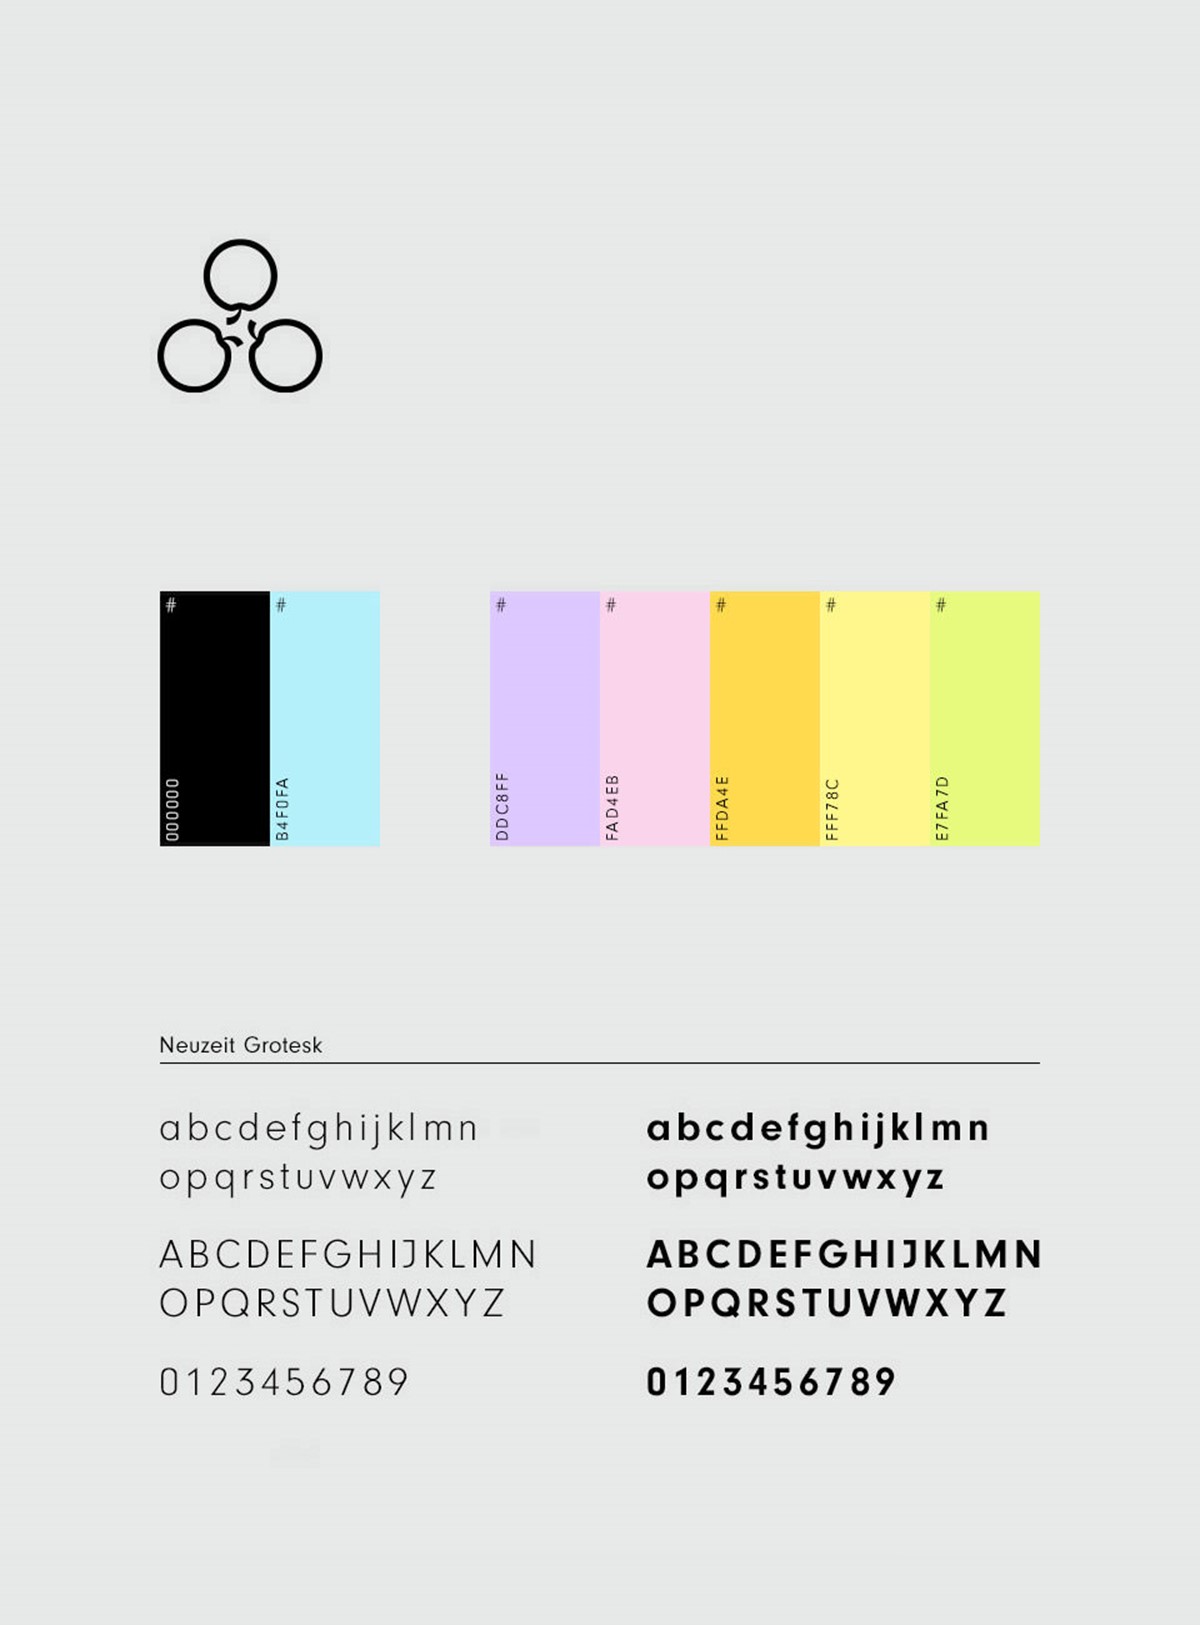 TRIPOM. Brand guidelines – palette and typography. Brand identity design by Superfried.